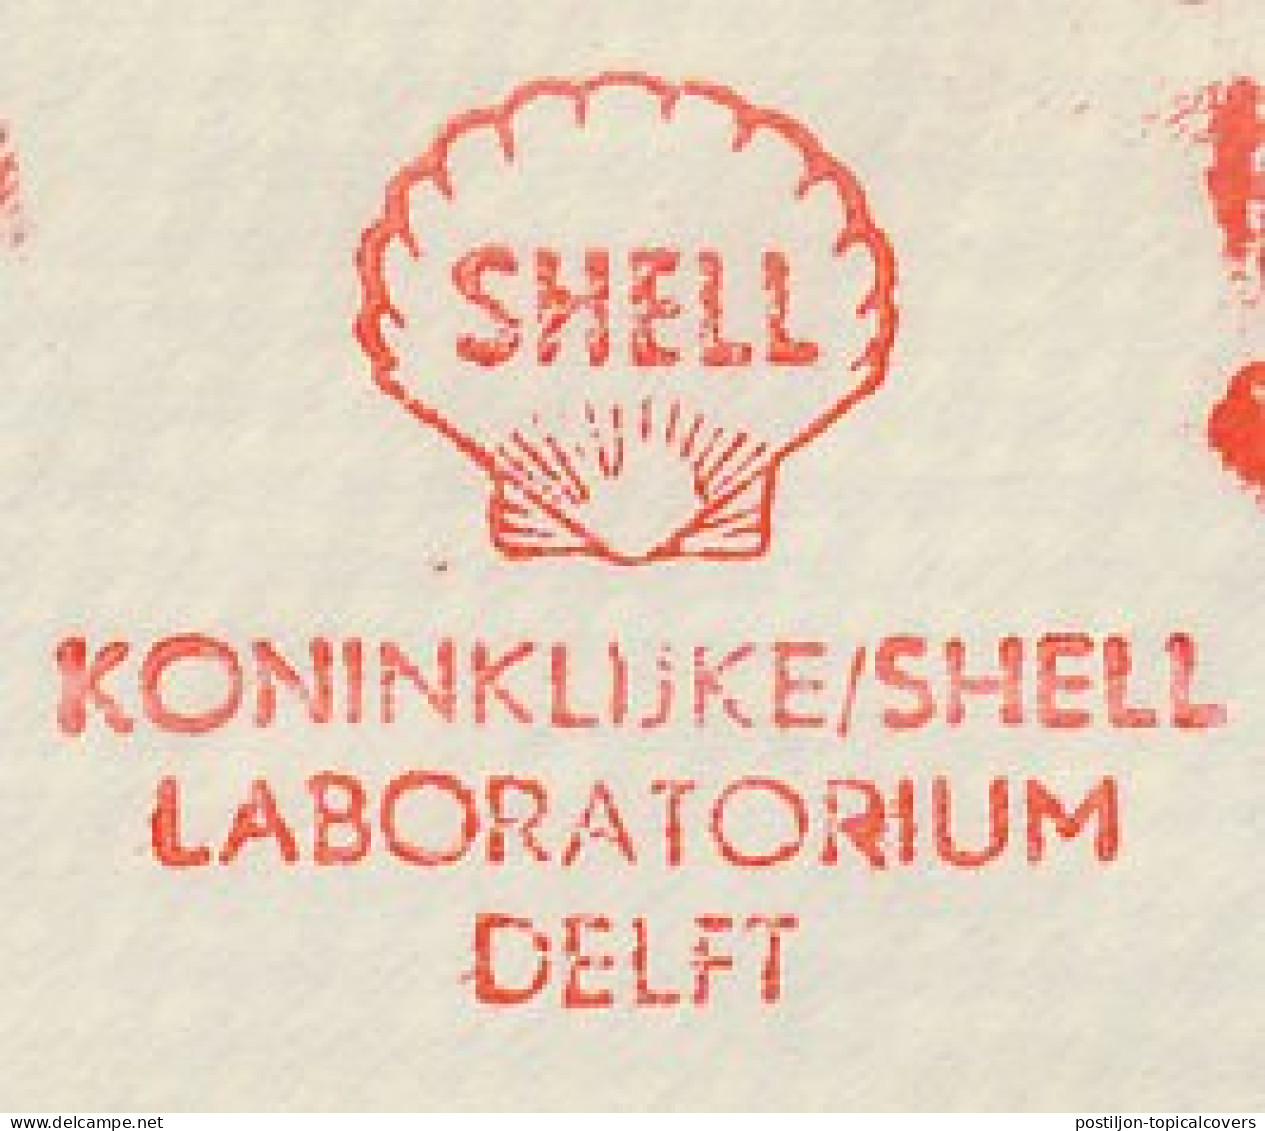 Meter Cut Netherlands 1957 Shell - Oil - Other & Unclassified